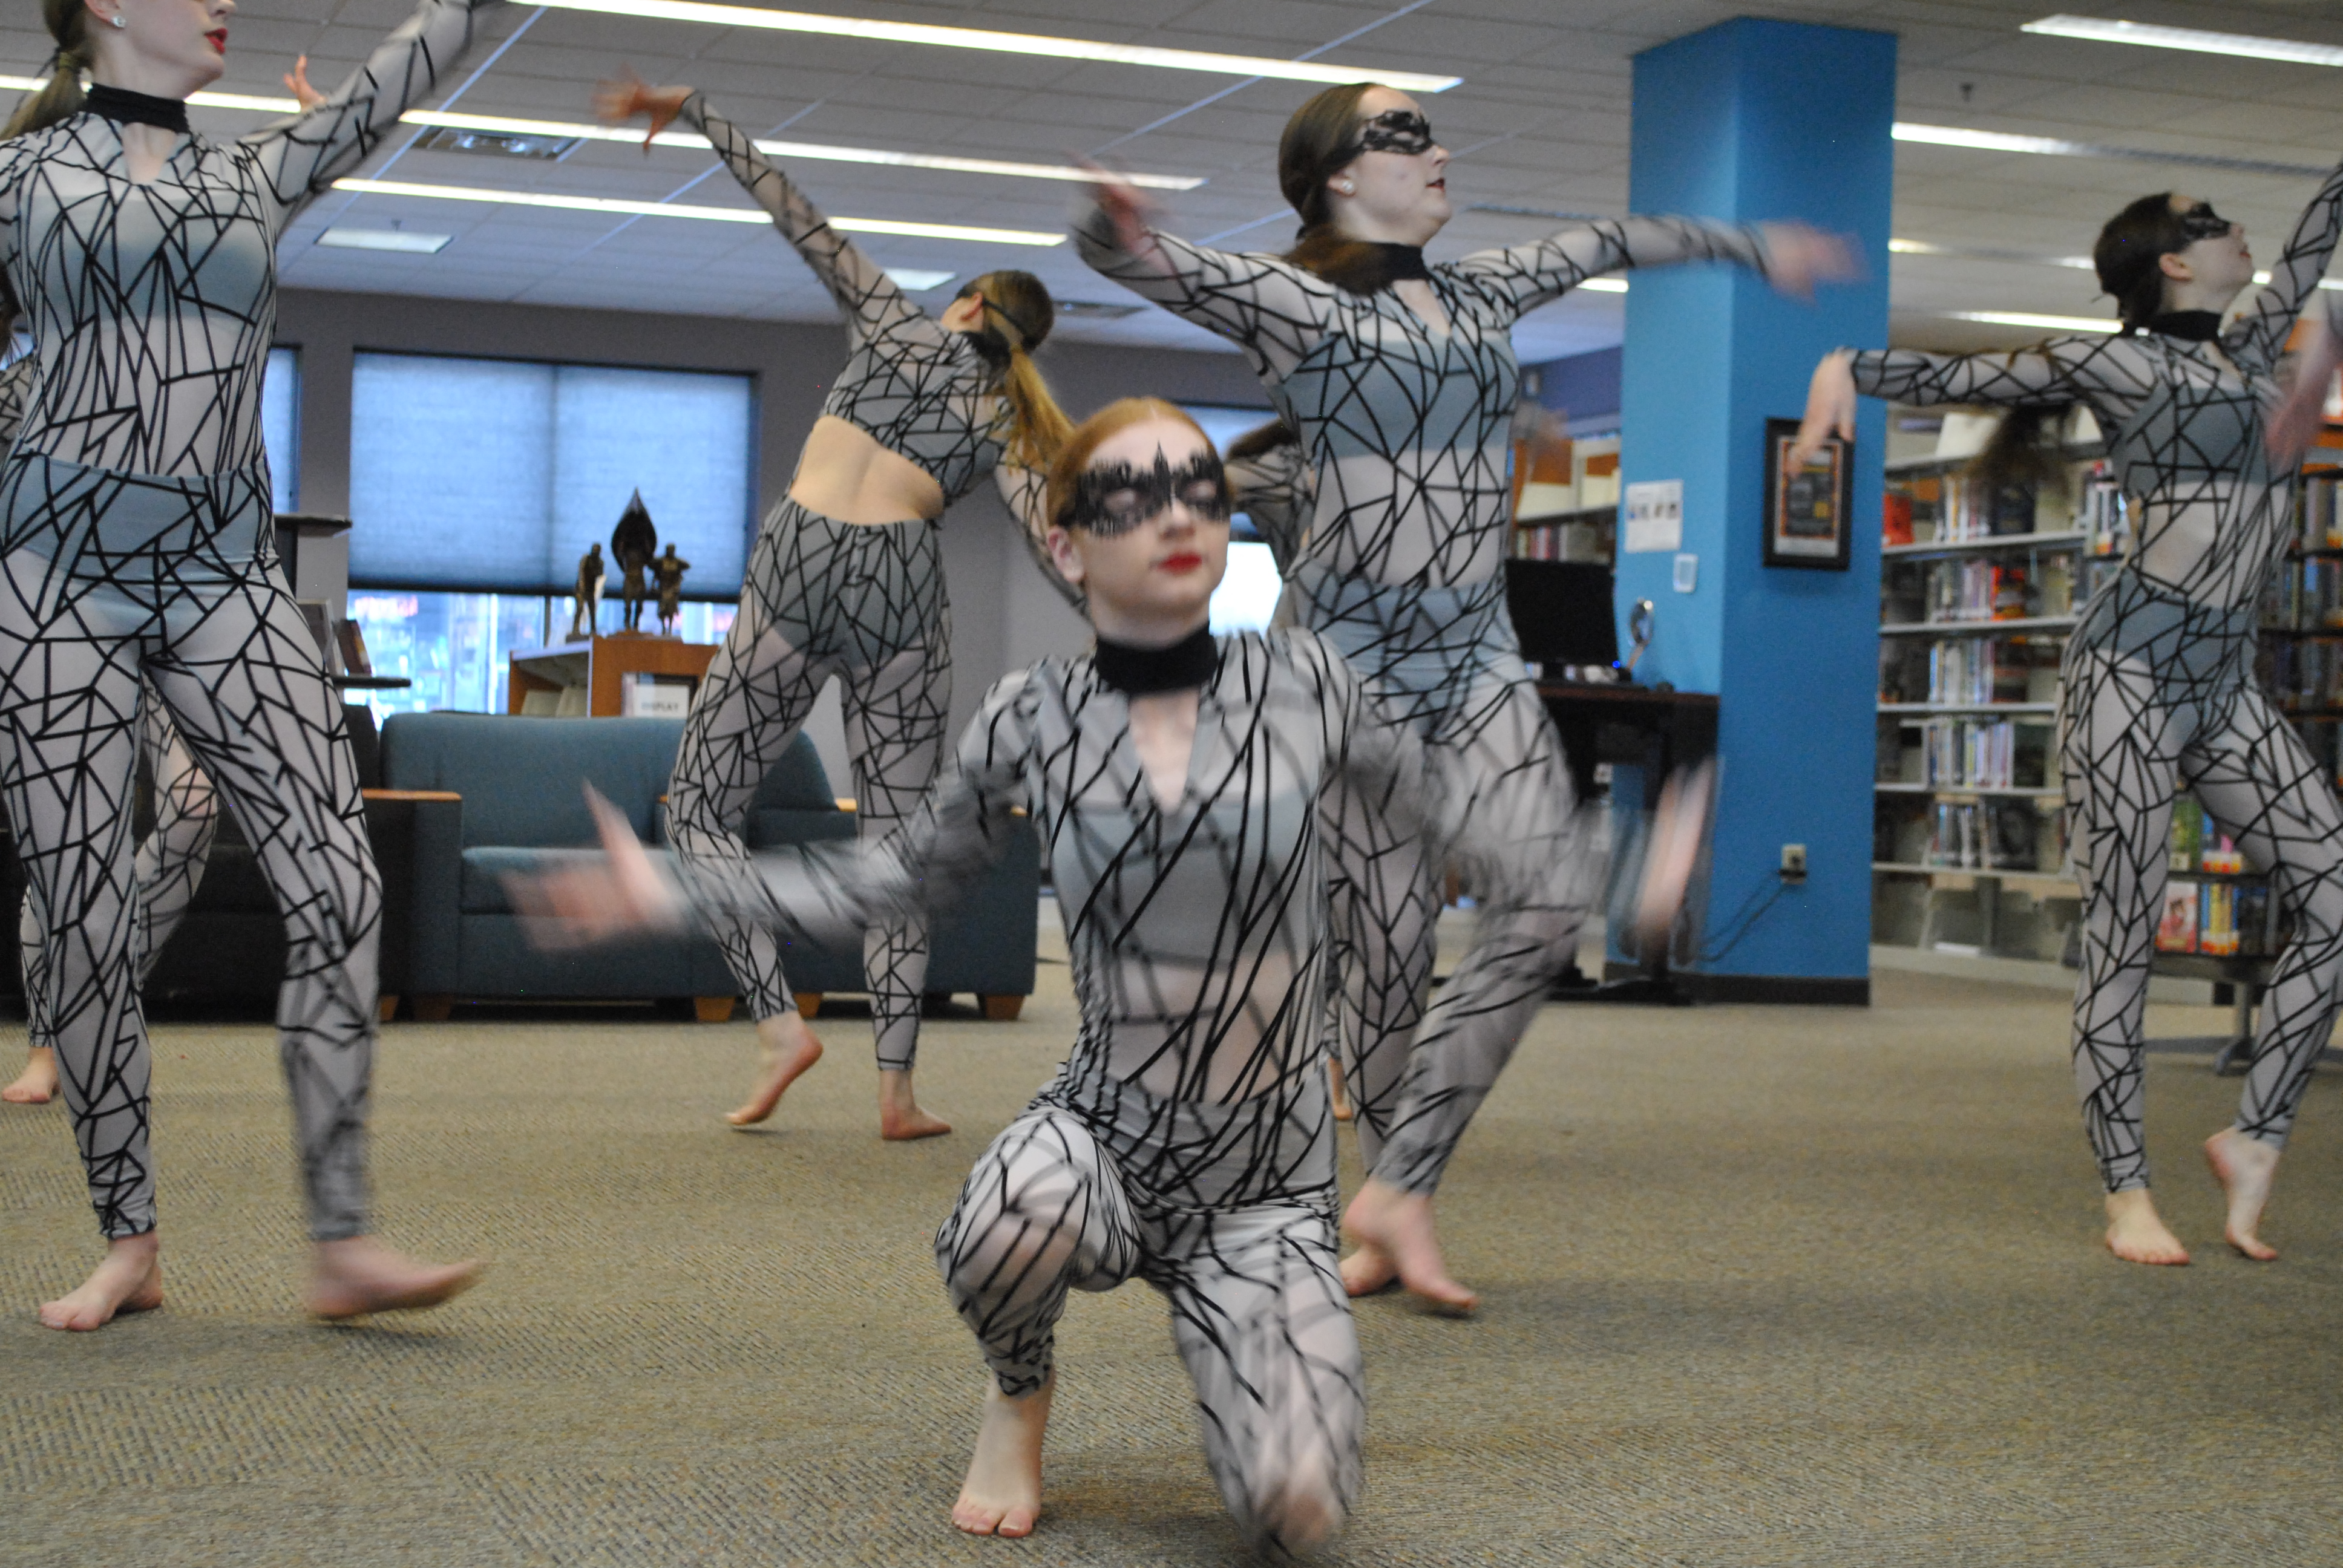 Dancers with Kaleidoscope troupe perform in matching costumes